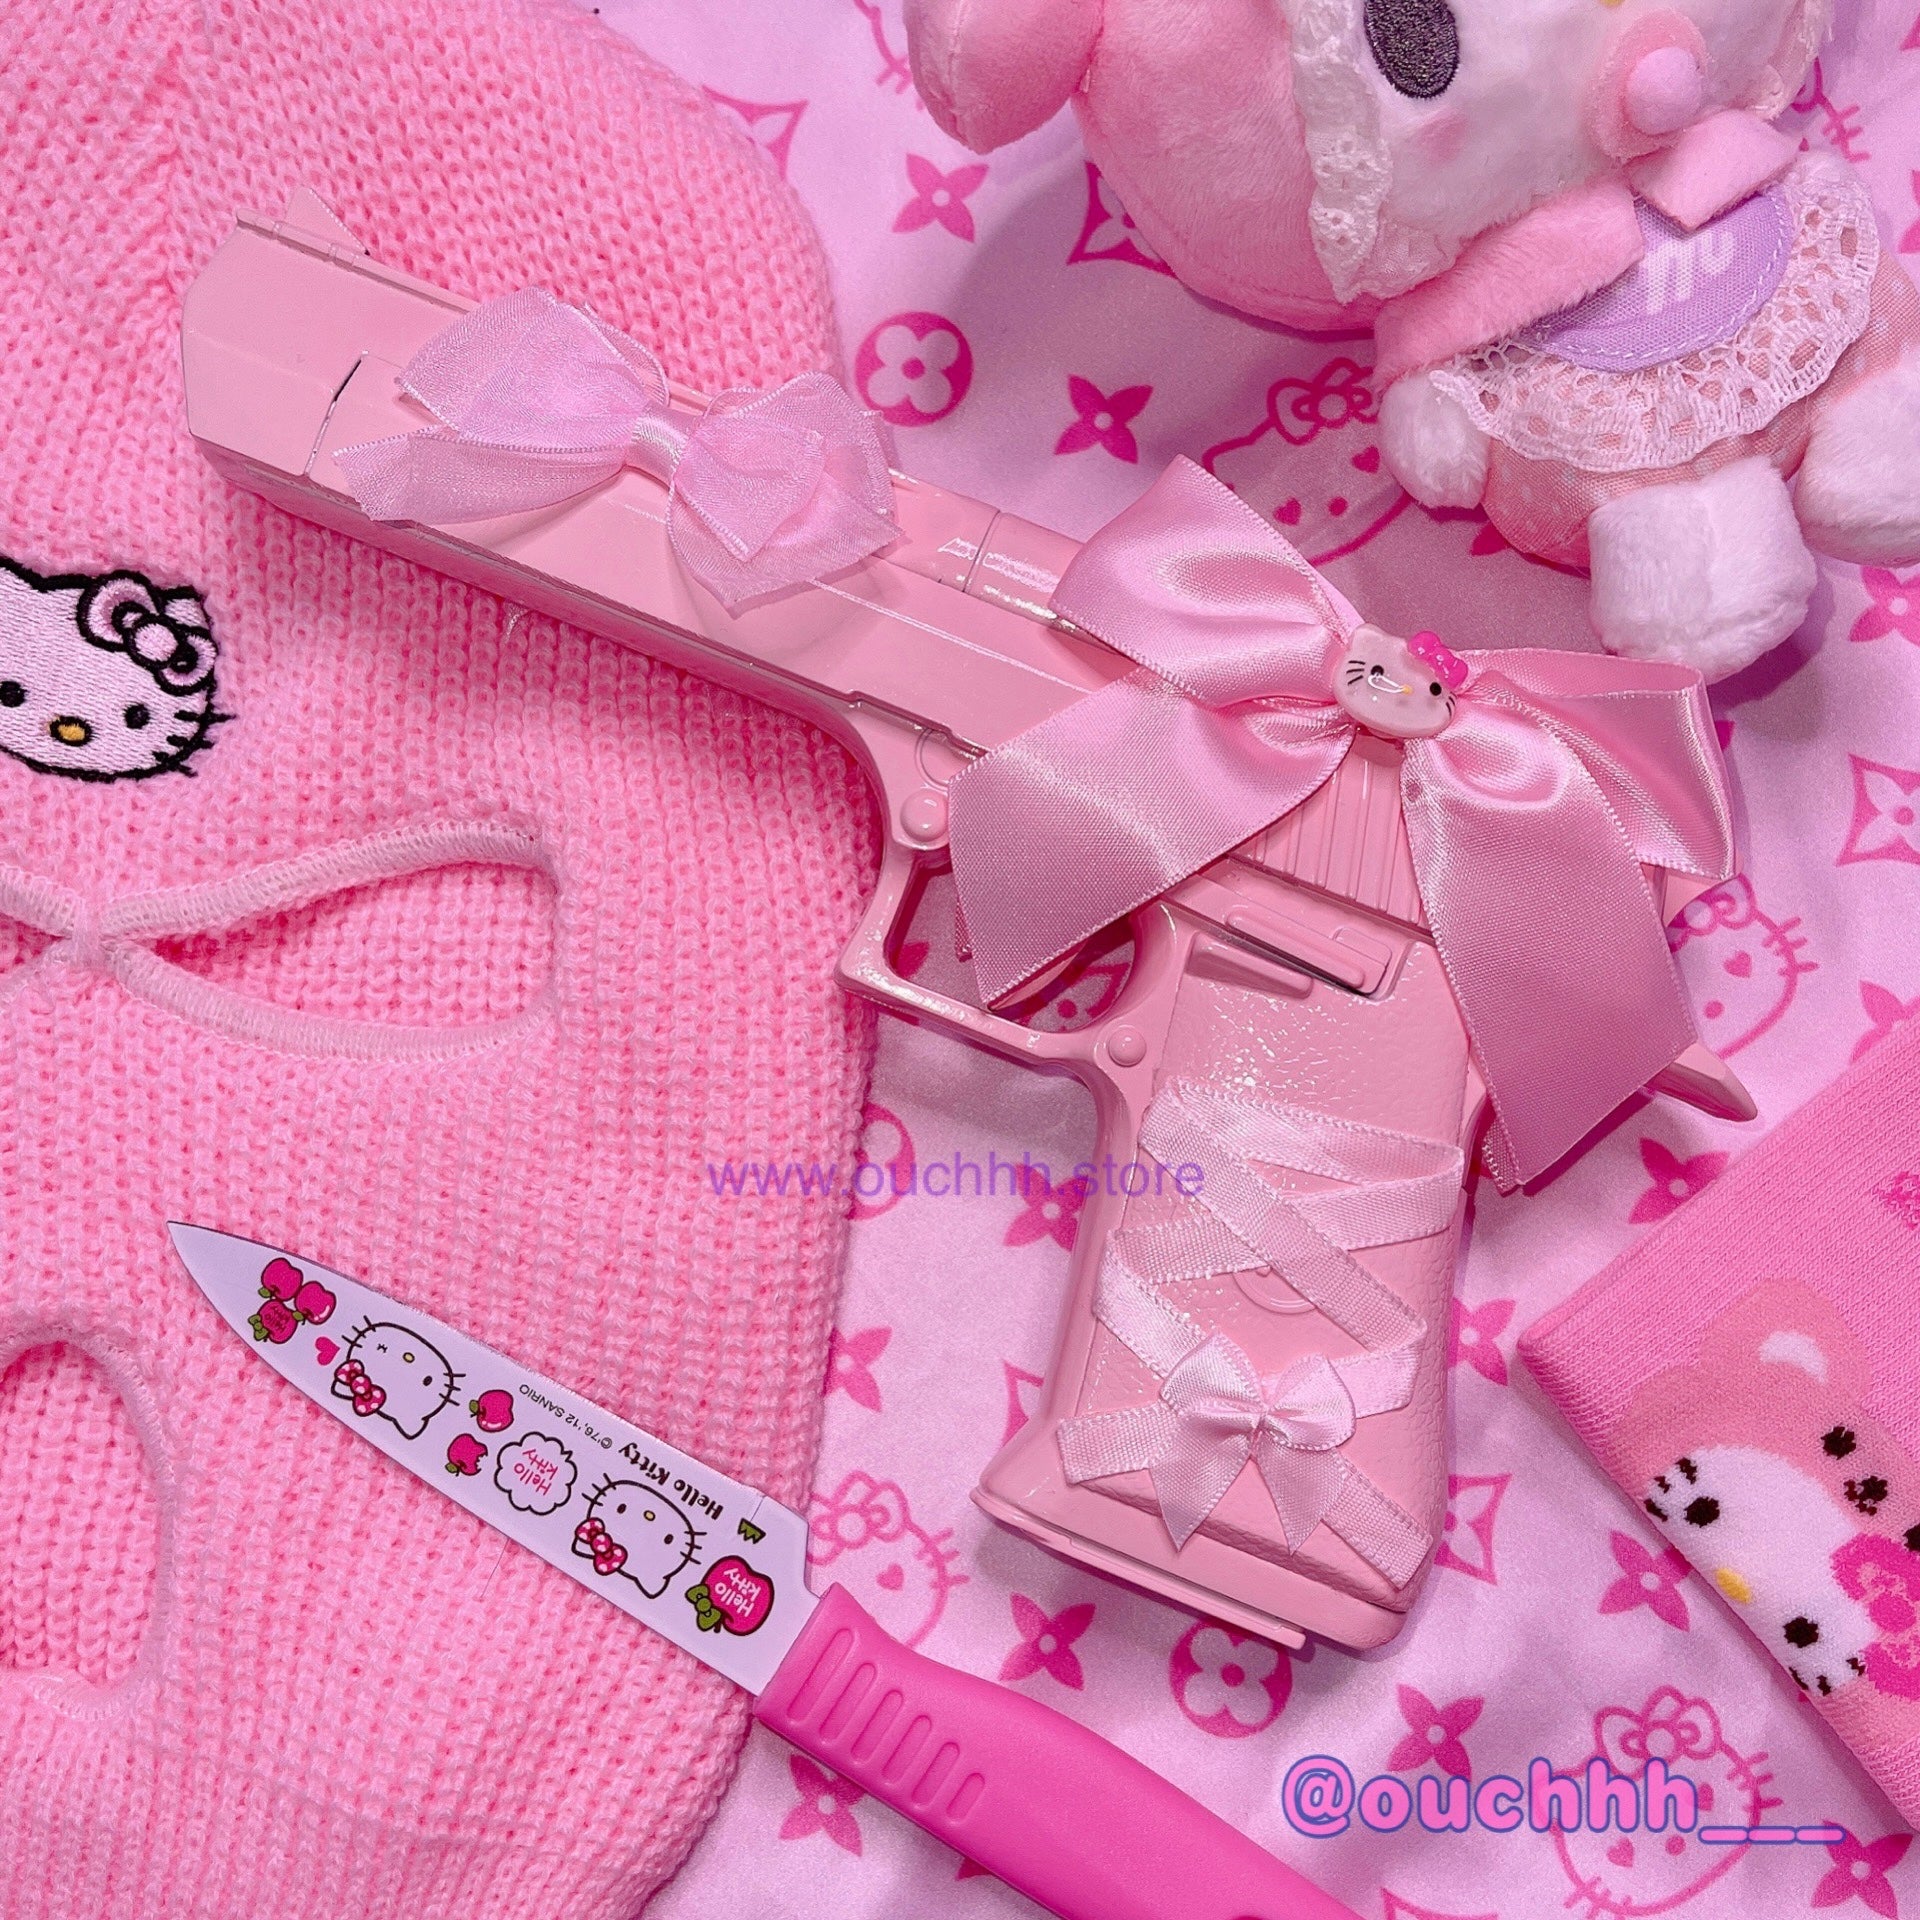 12 Girly Weapons